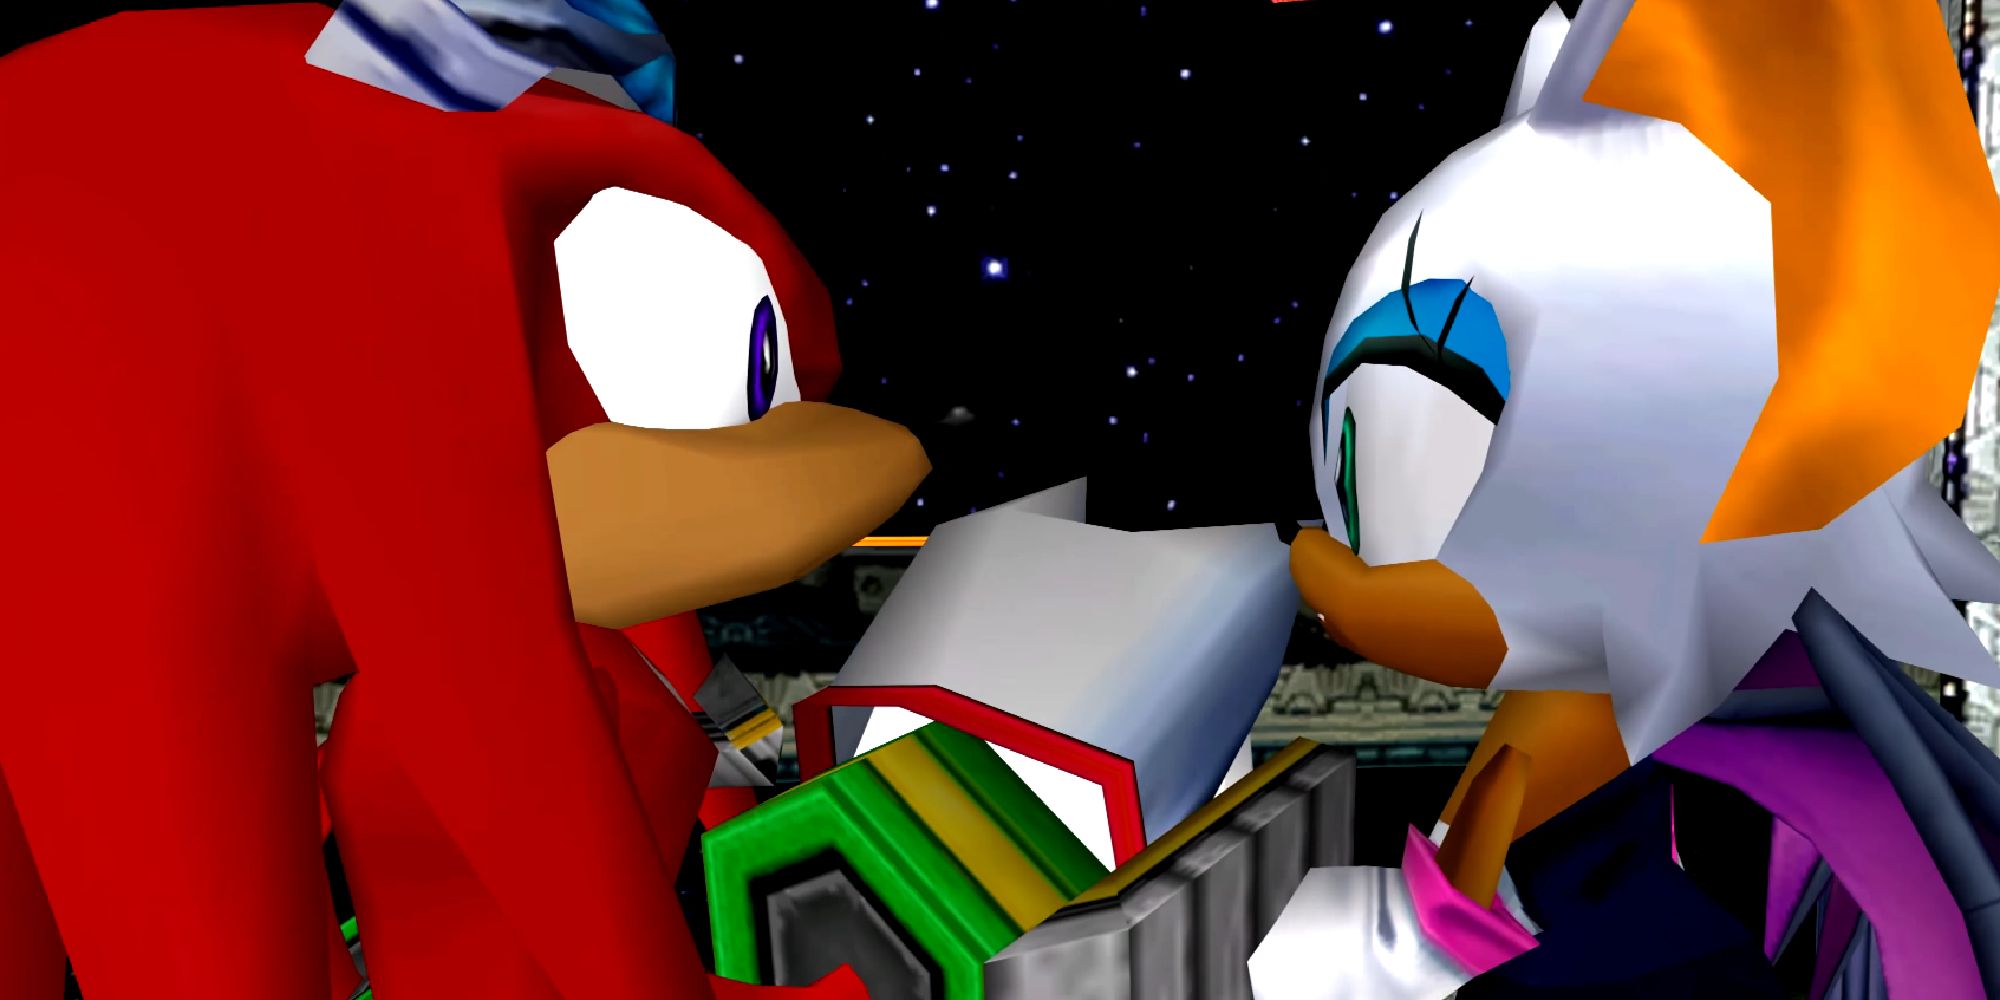 Knuckles holding Rouge's hand on the ARK in Sonic Adventure 2